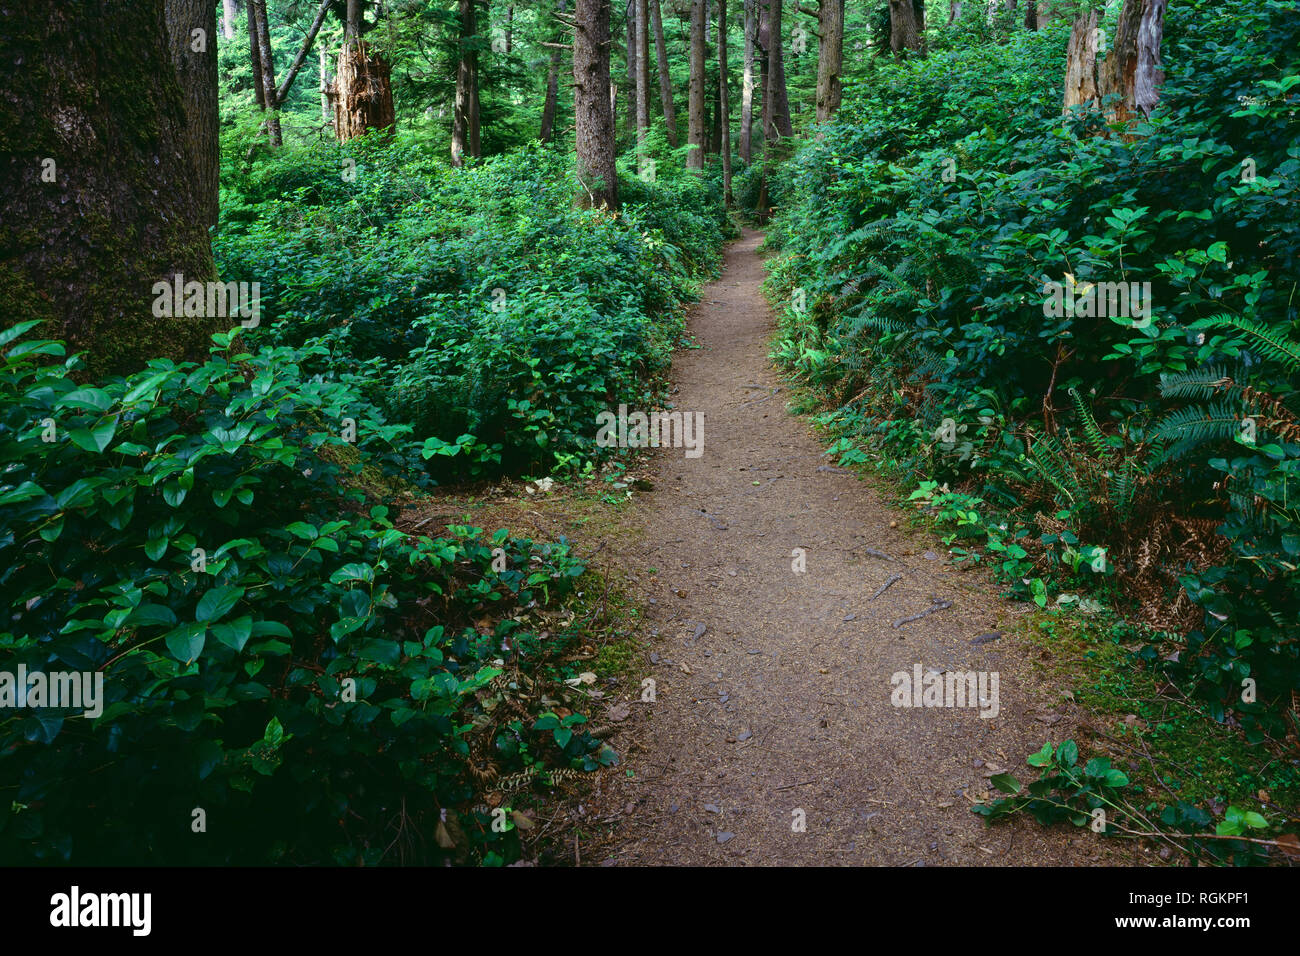 USA, Oregon, Oswald West State Park, Trail through old growth Sitka spruce forest with lush understory. Stock Photo